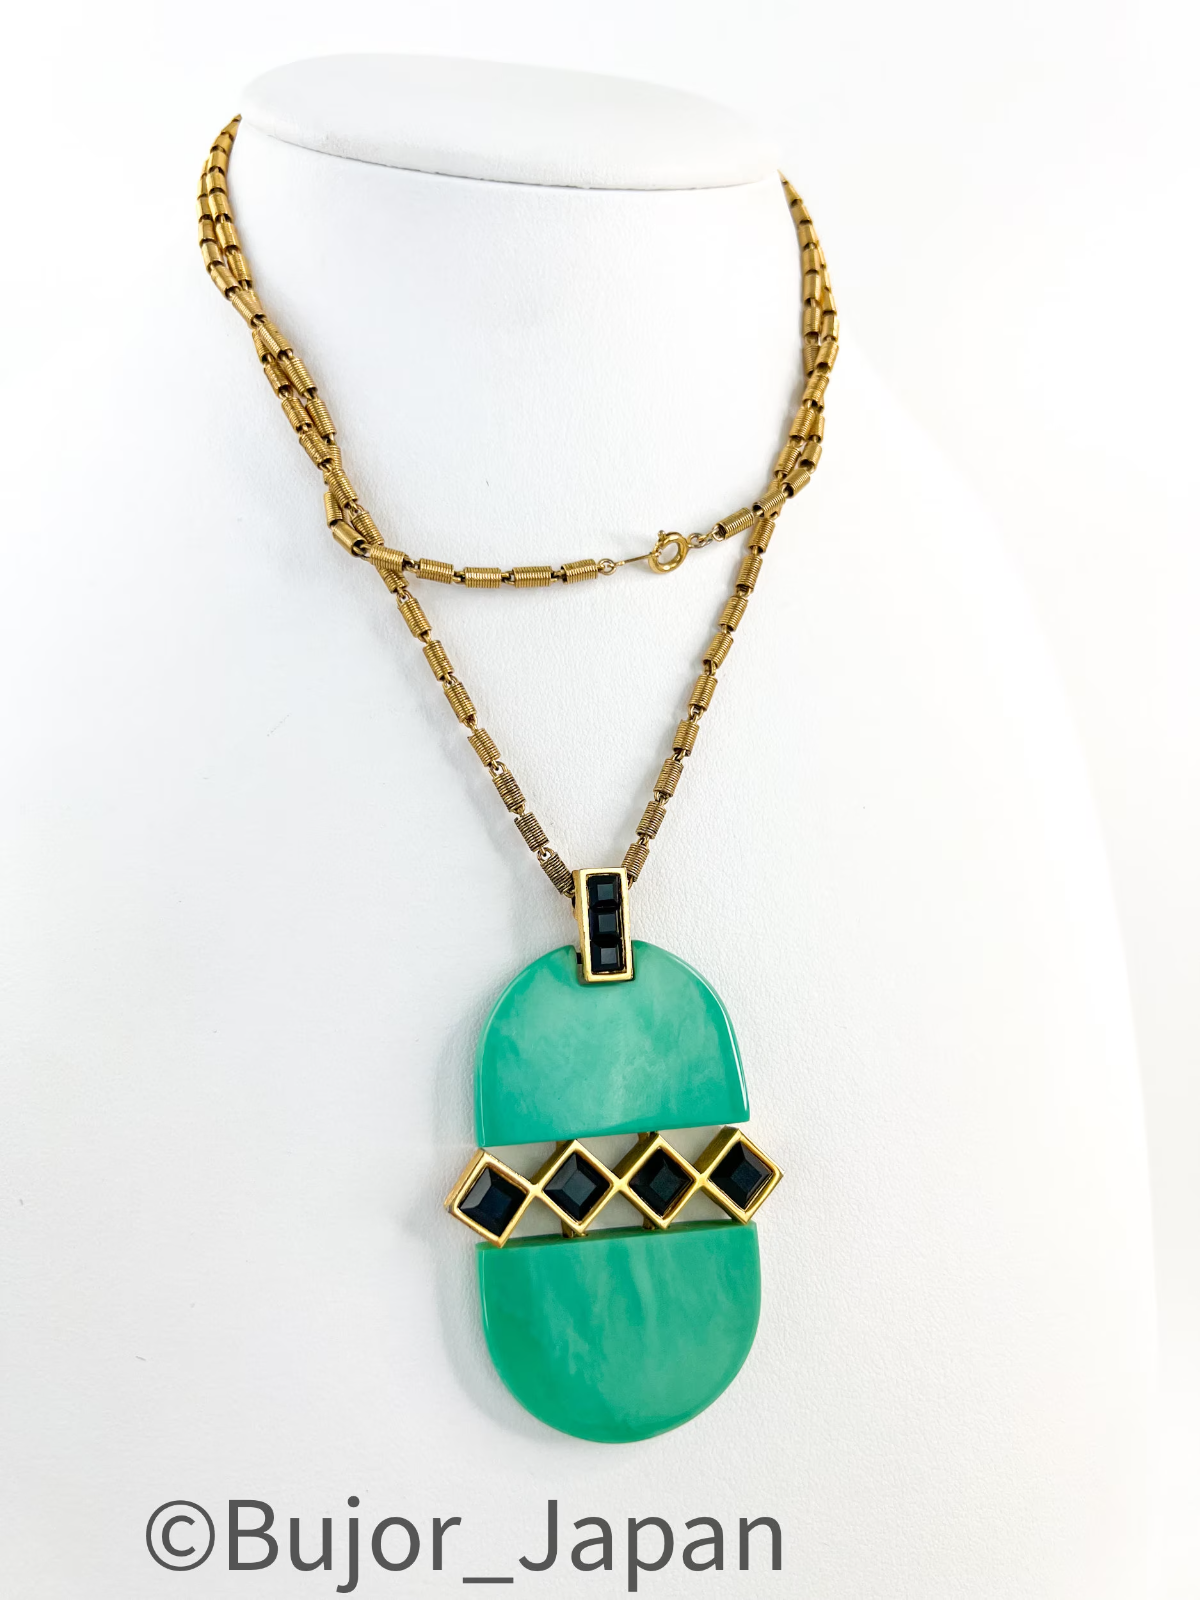 Vintage Givenchy Necklace, Givenchy Green Long necklace, Necklace Gold, Vintage Necklace Pendant, Jewelry for Women, Gift for her